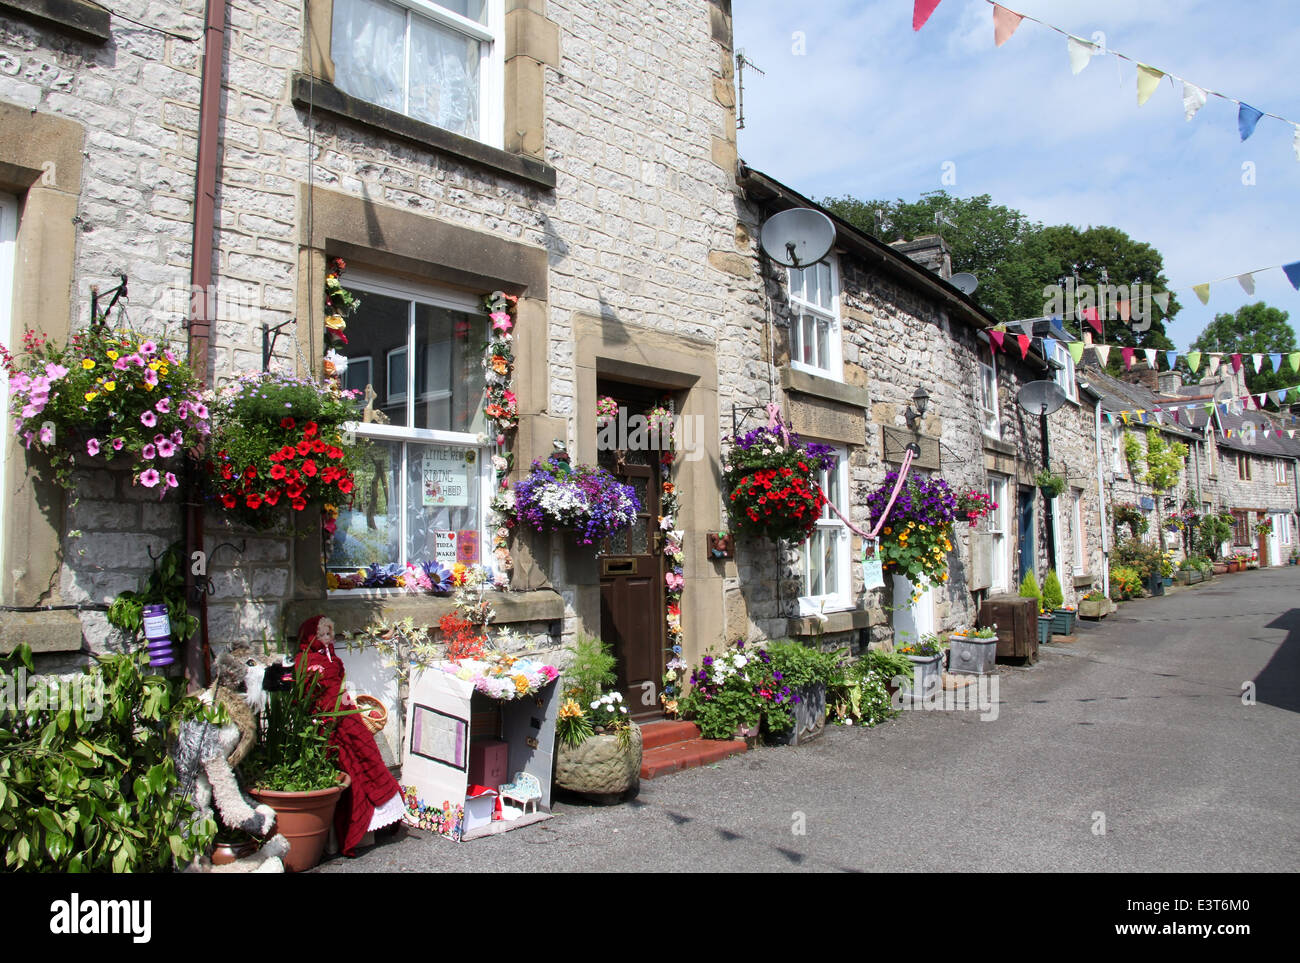 Derbyshire village of Tideswell in the Peak District National Park decorated for Wakes Week Stock Photo